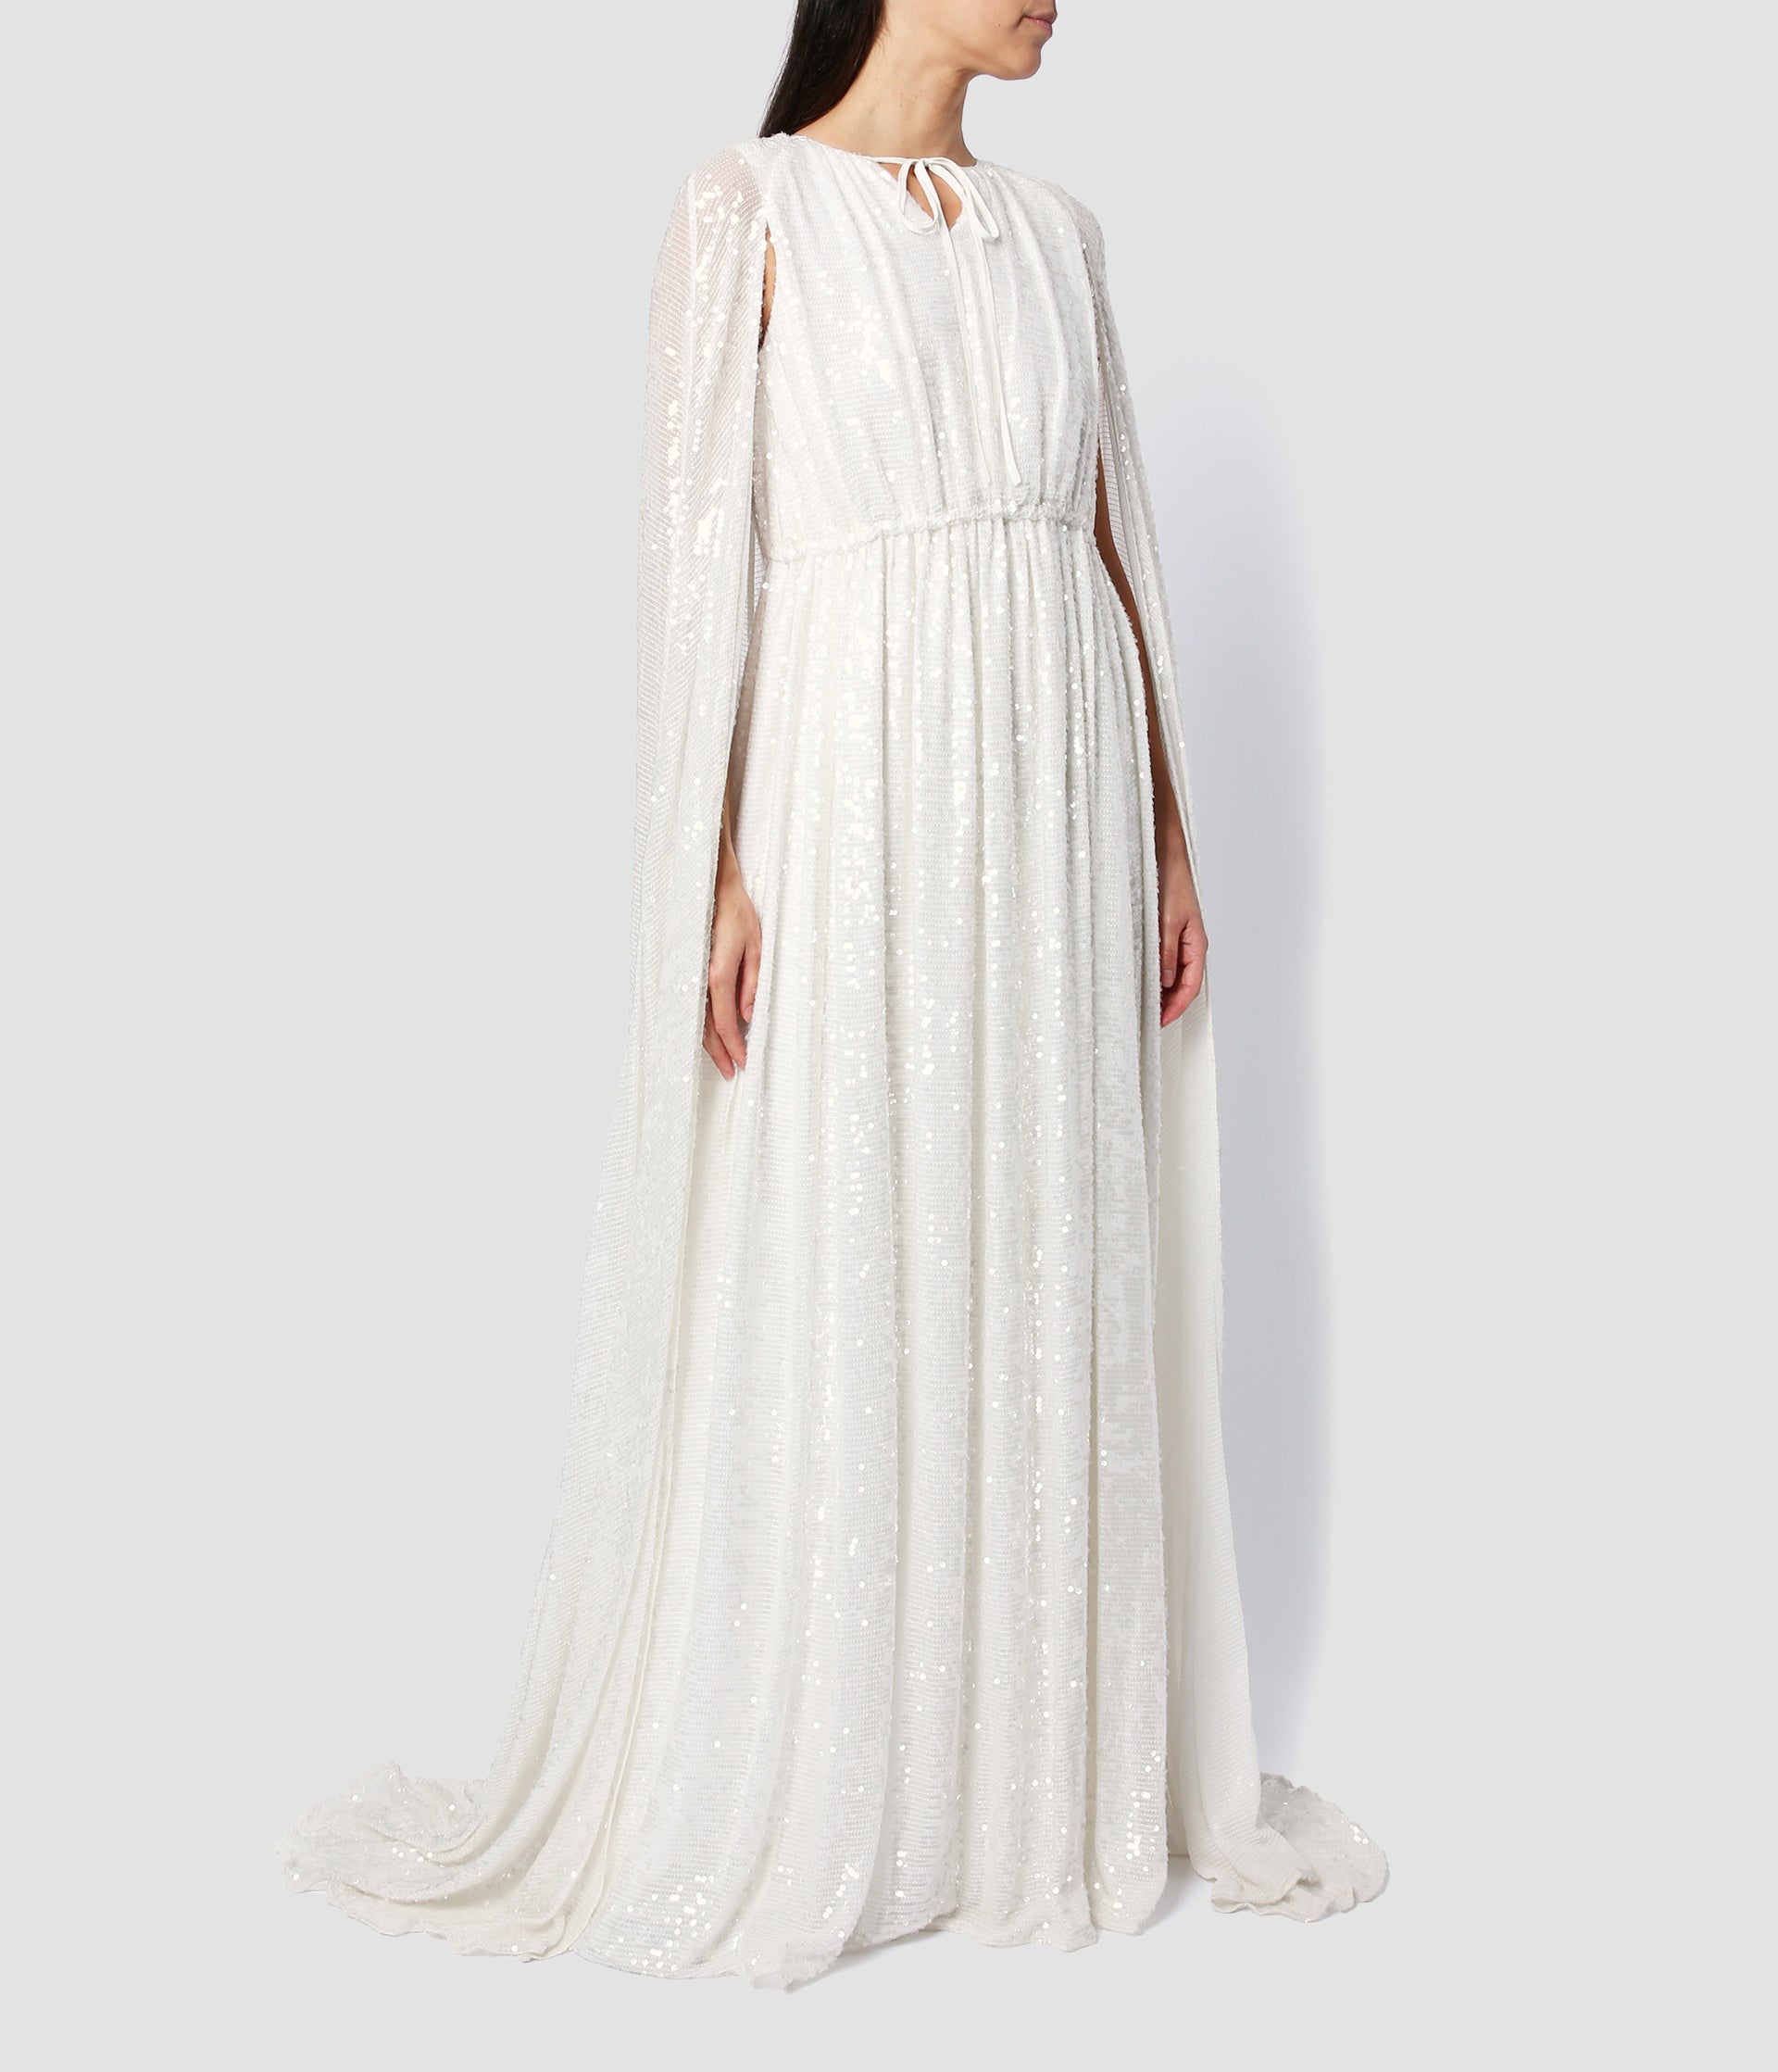 The kenley gown is a wedding dress from designer ERDEM. The dramatic sequined wedding dress, features a gathered dress with a floor length cape. 